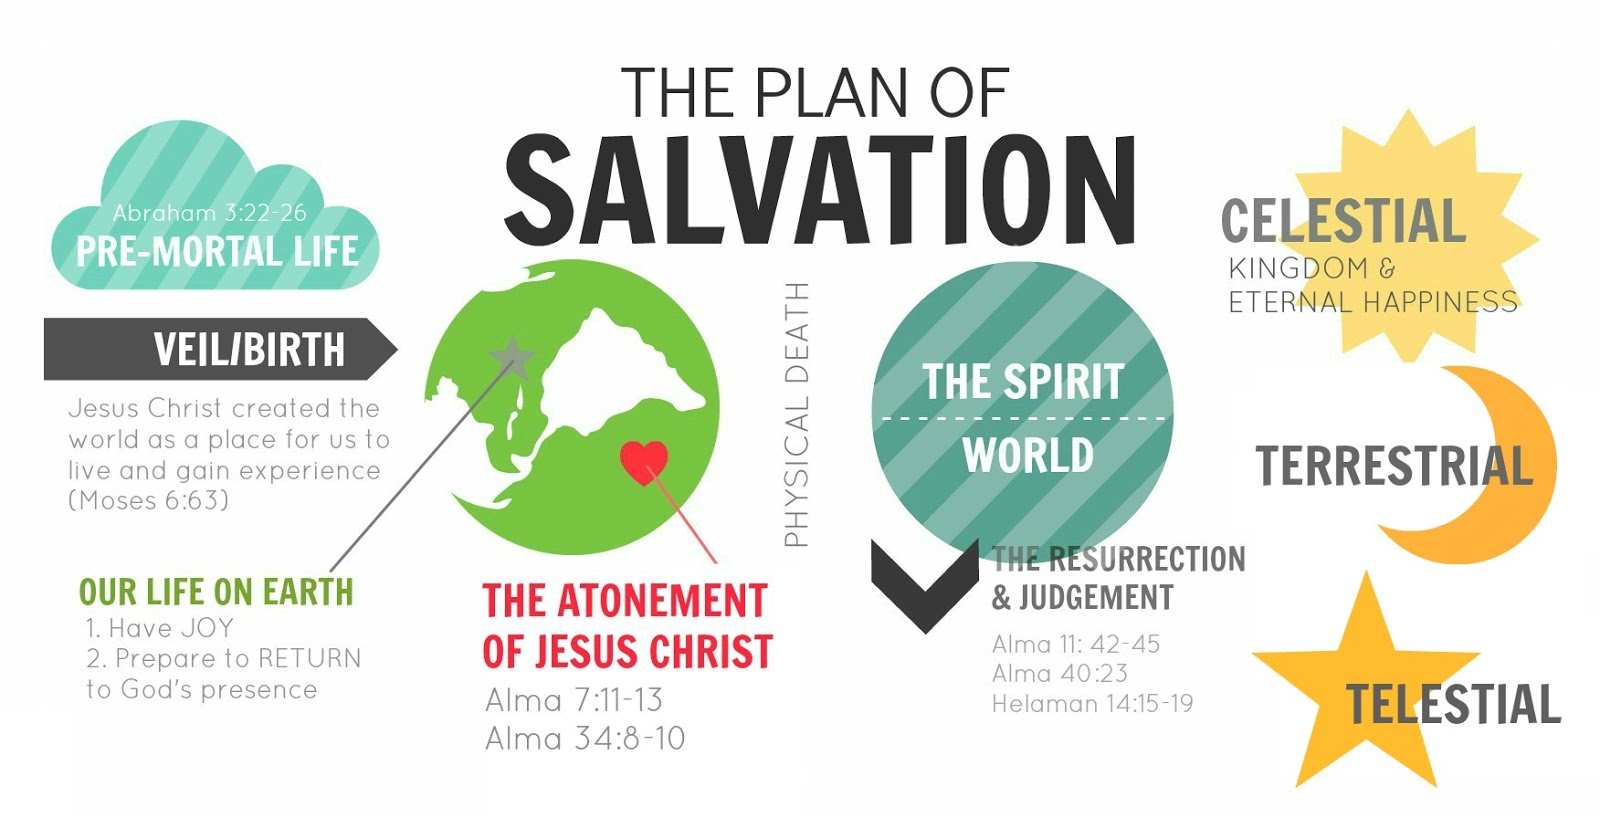 Finding Peace in the Plan of Salvation